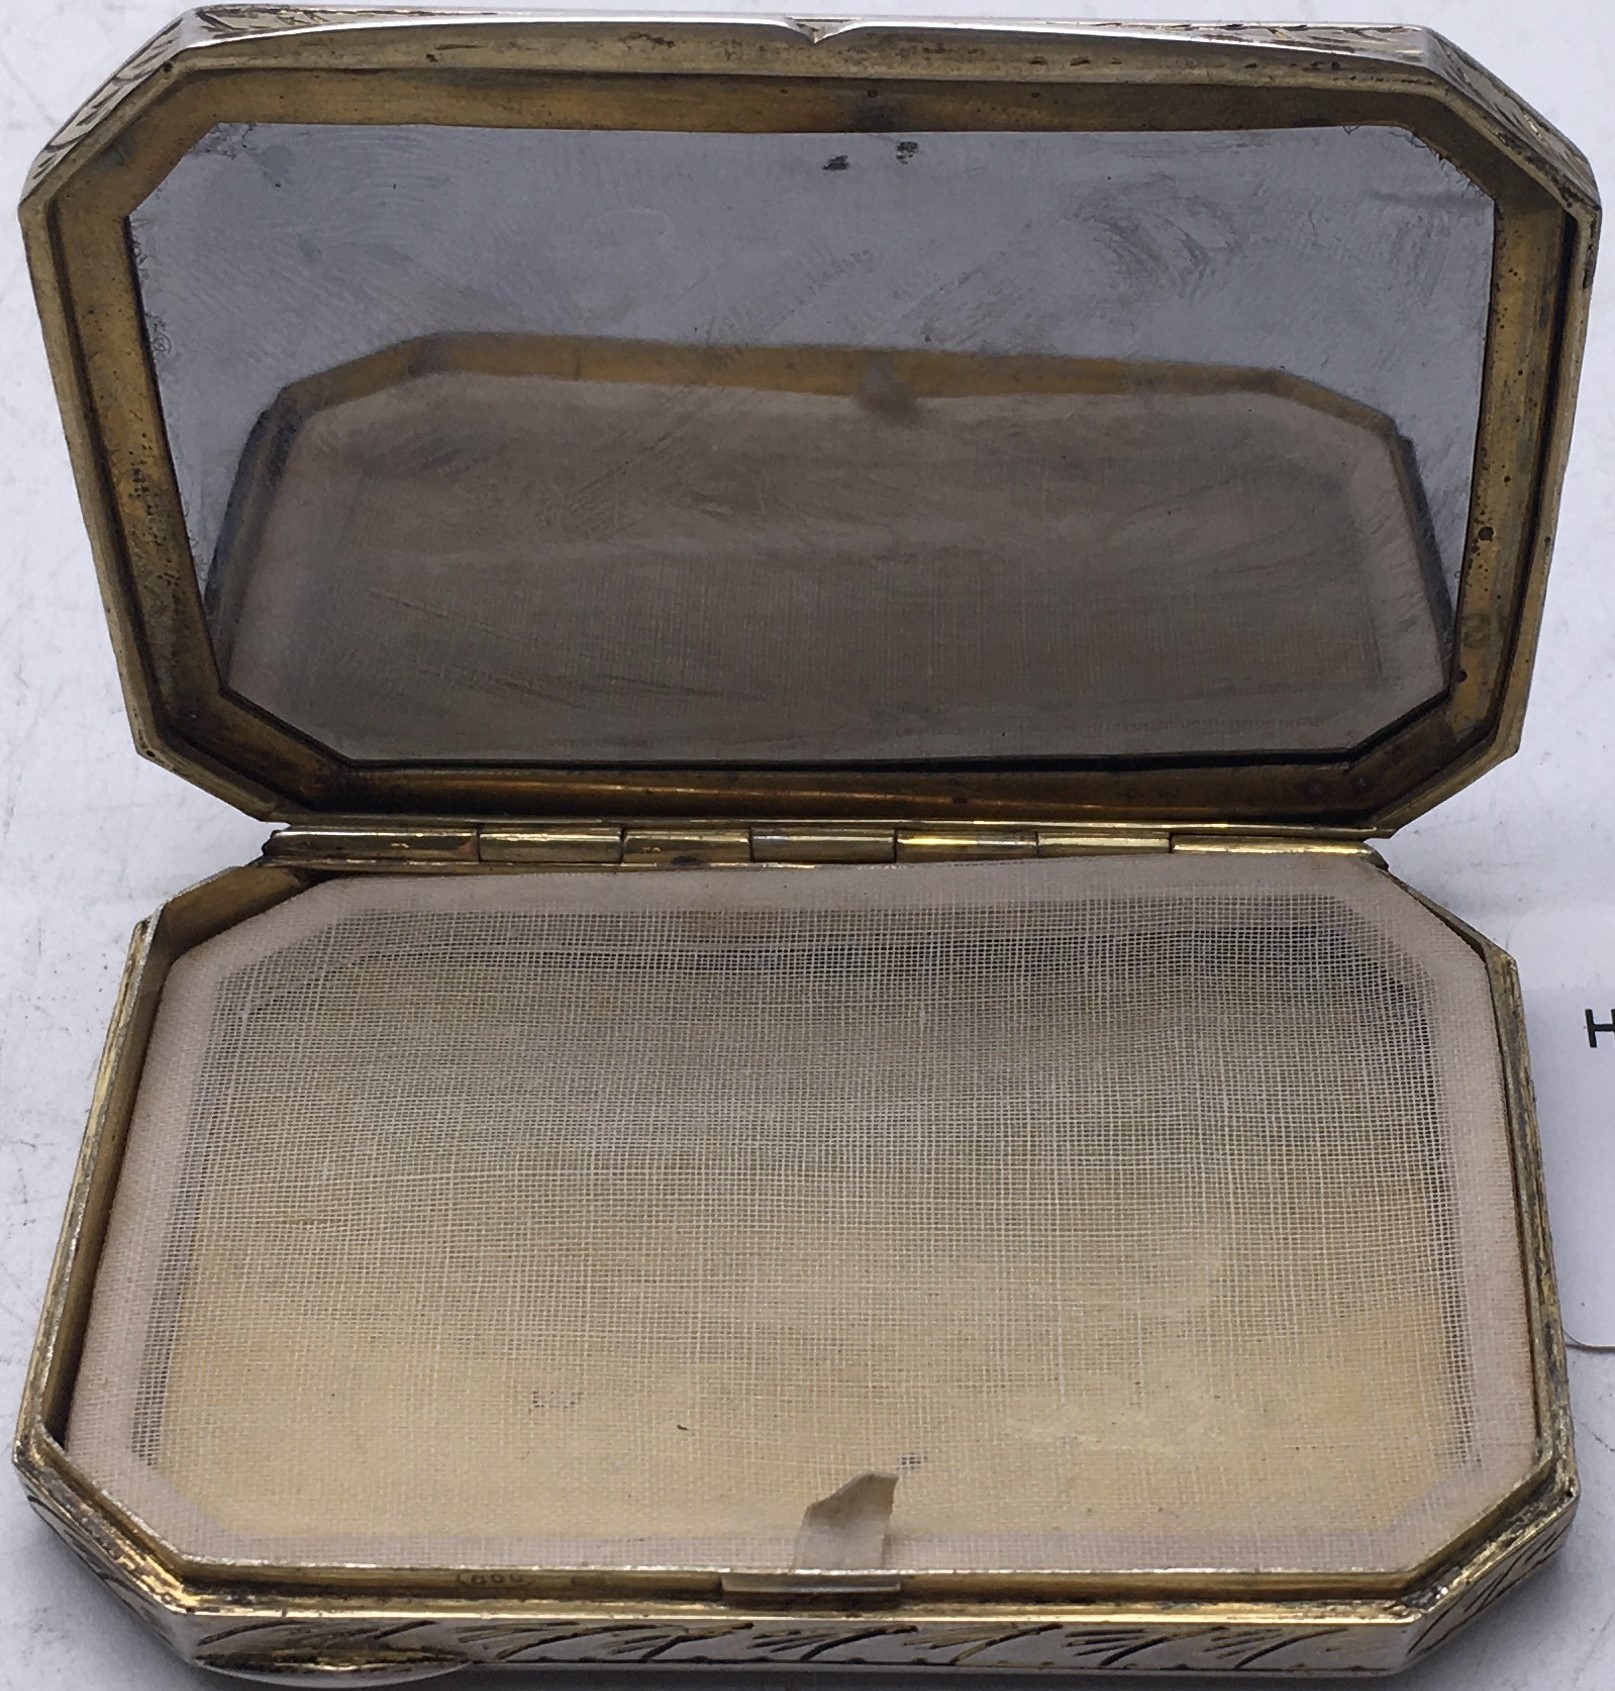 Edwardian period Silver and gilt gem set Ladies compact 3inches long and 2inches deep the top - Image 3 of 4